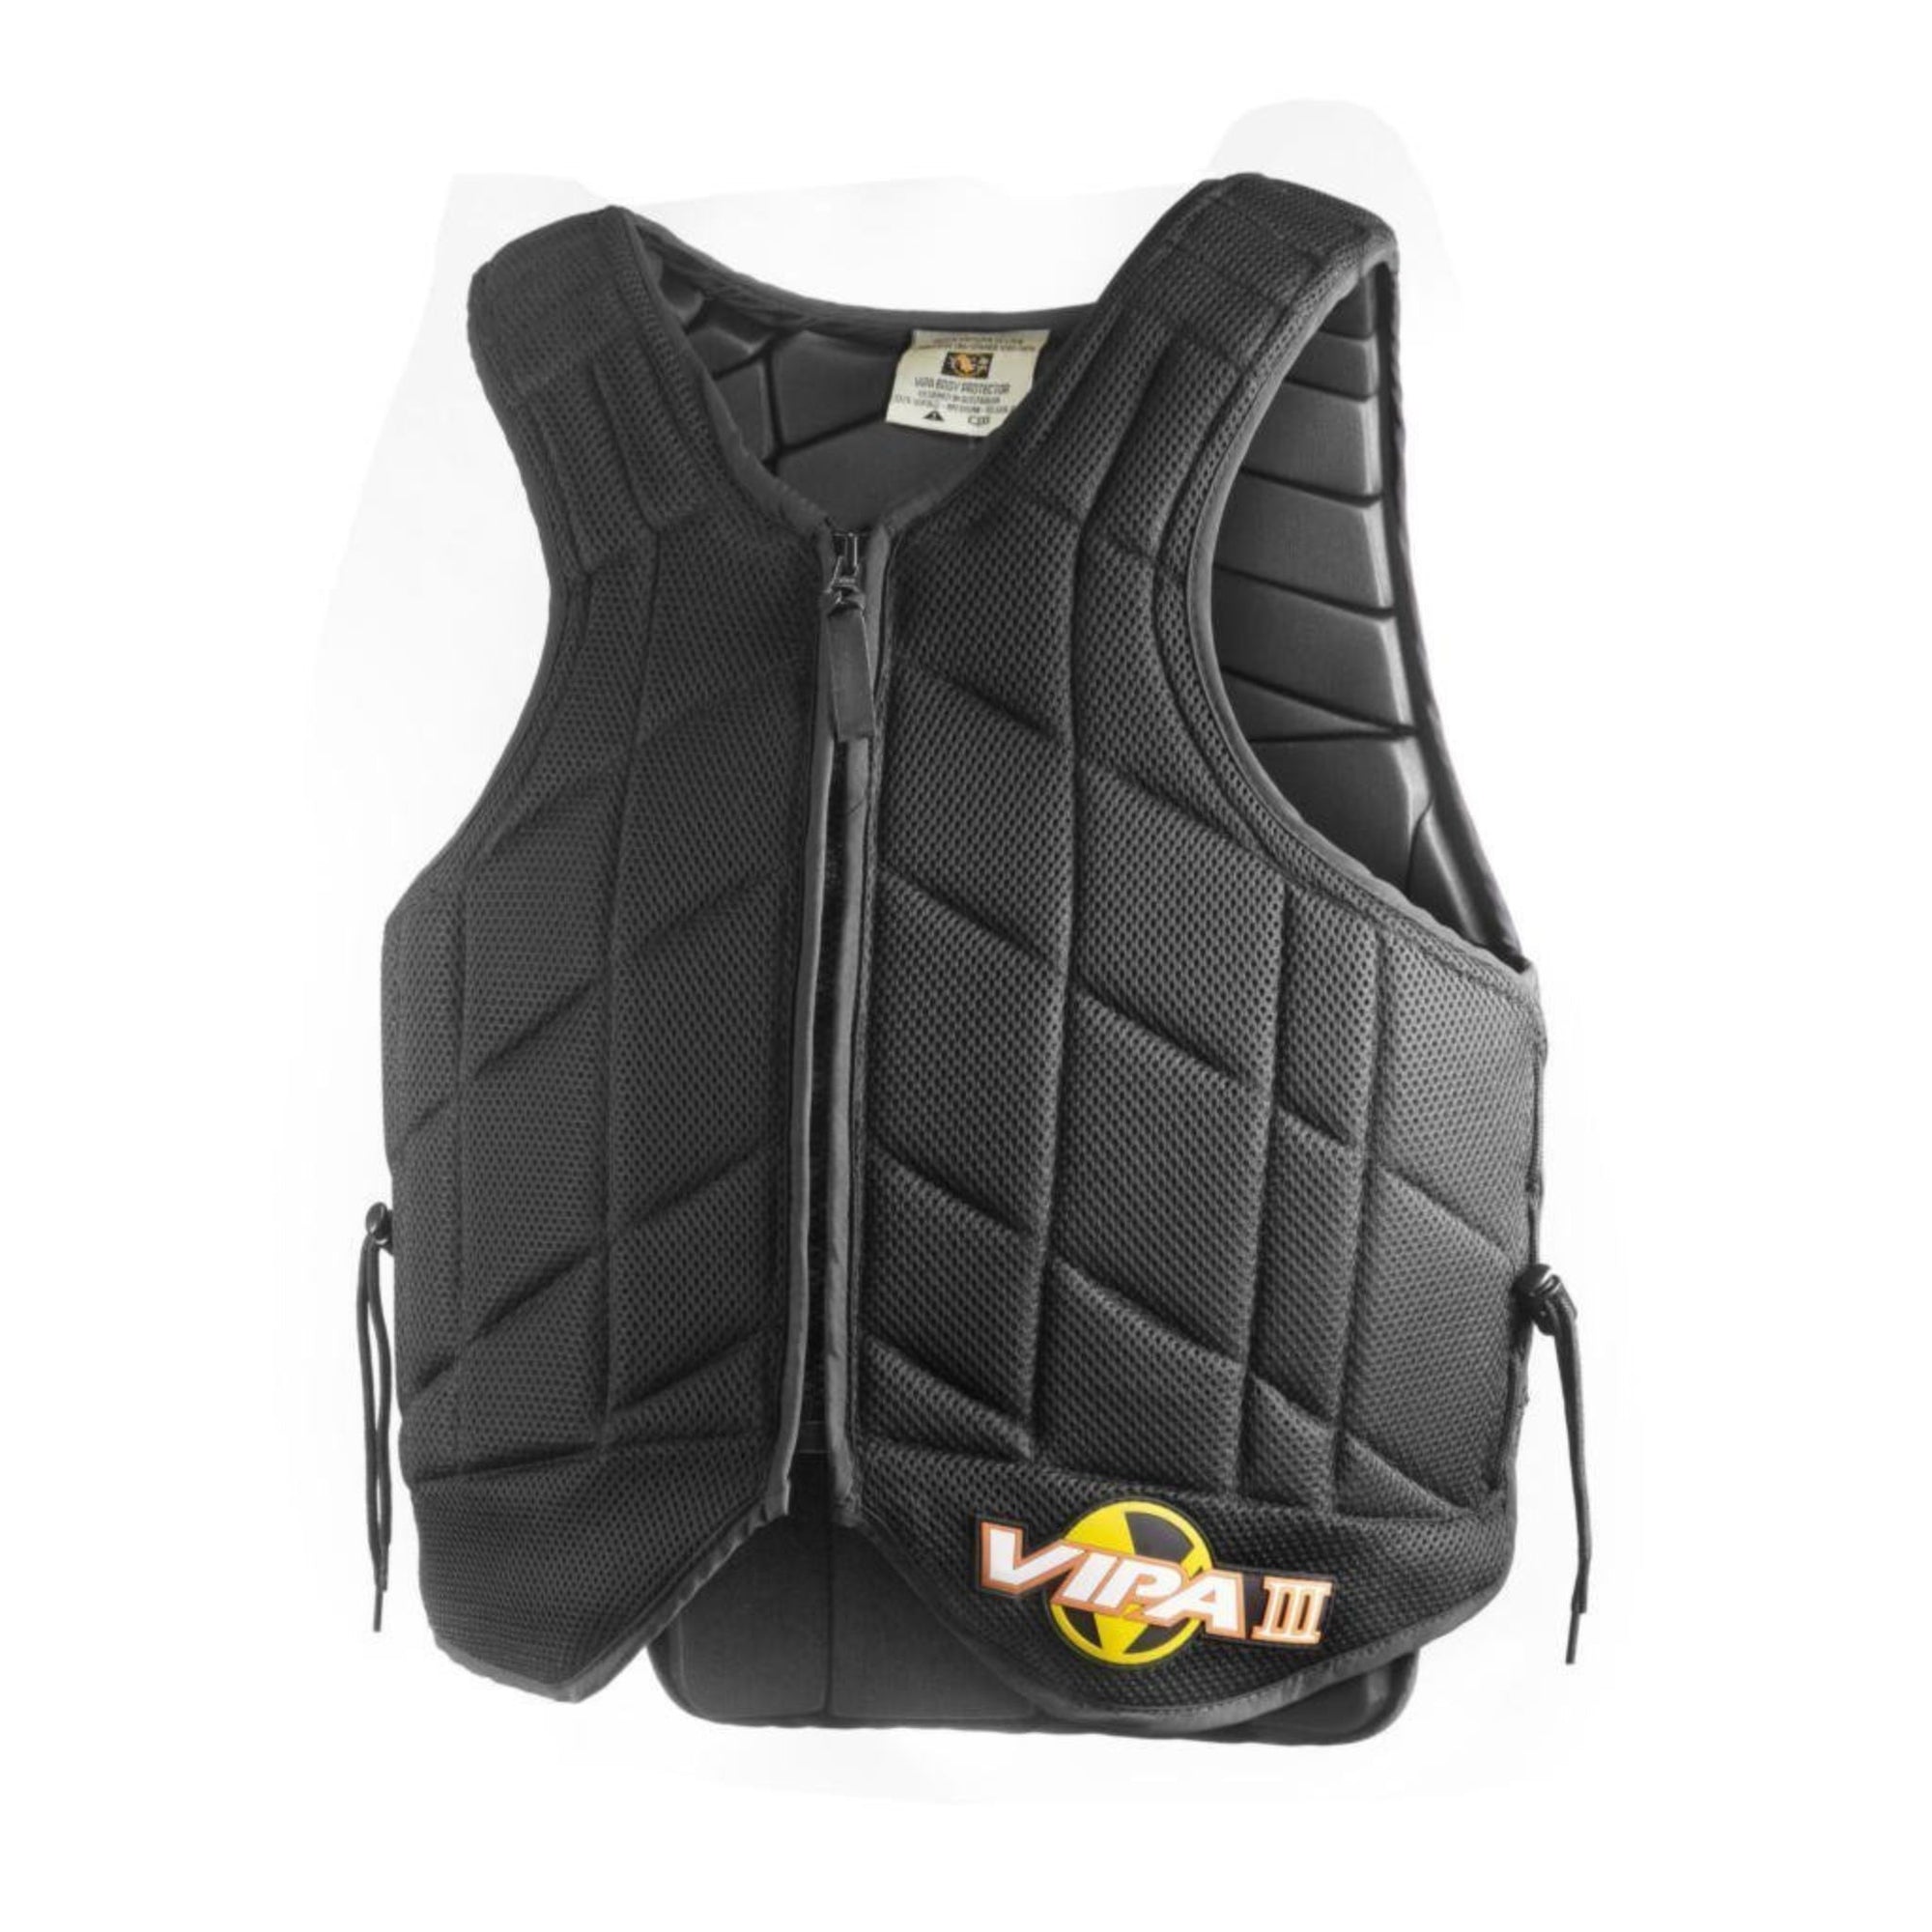 Black vest with yellow vipa 3 logo on the botton left side